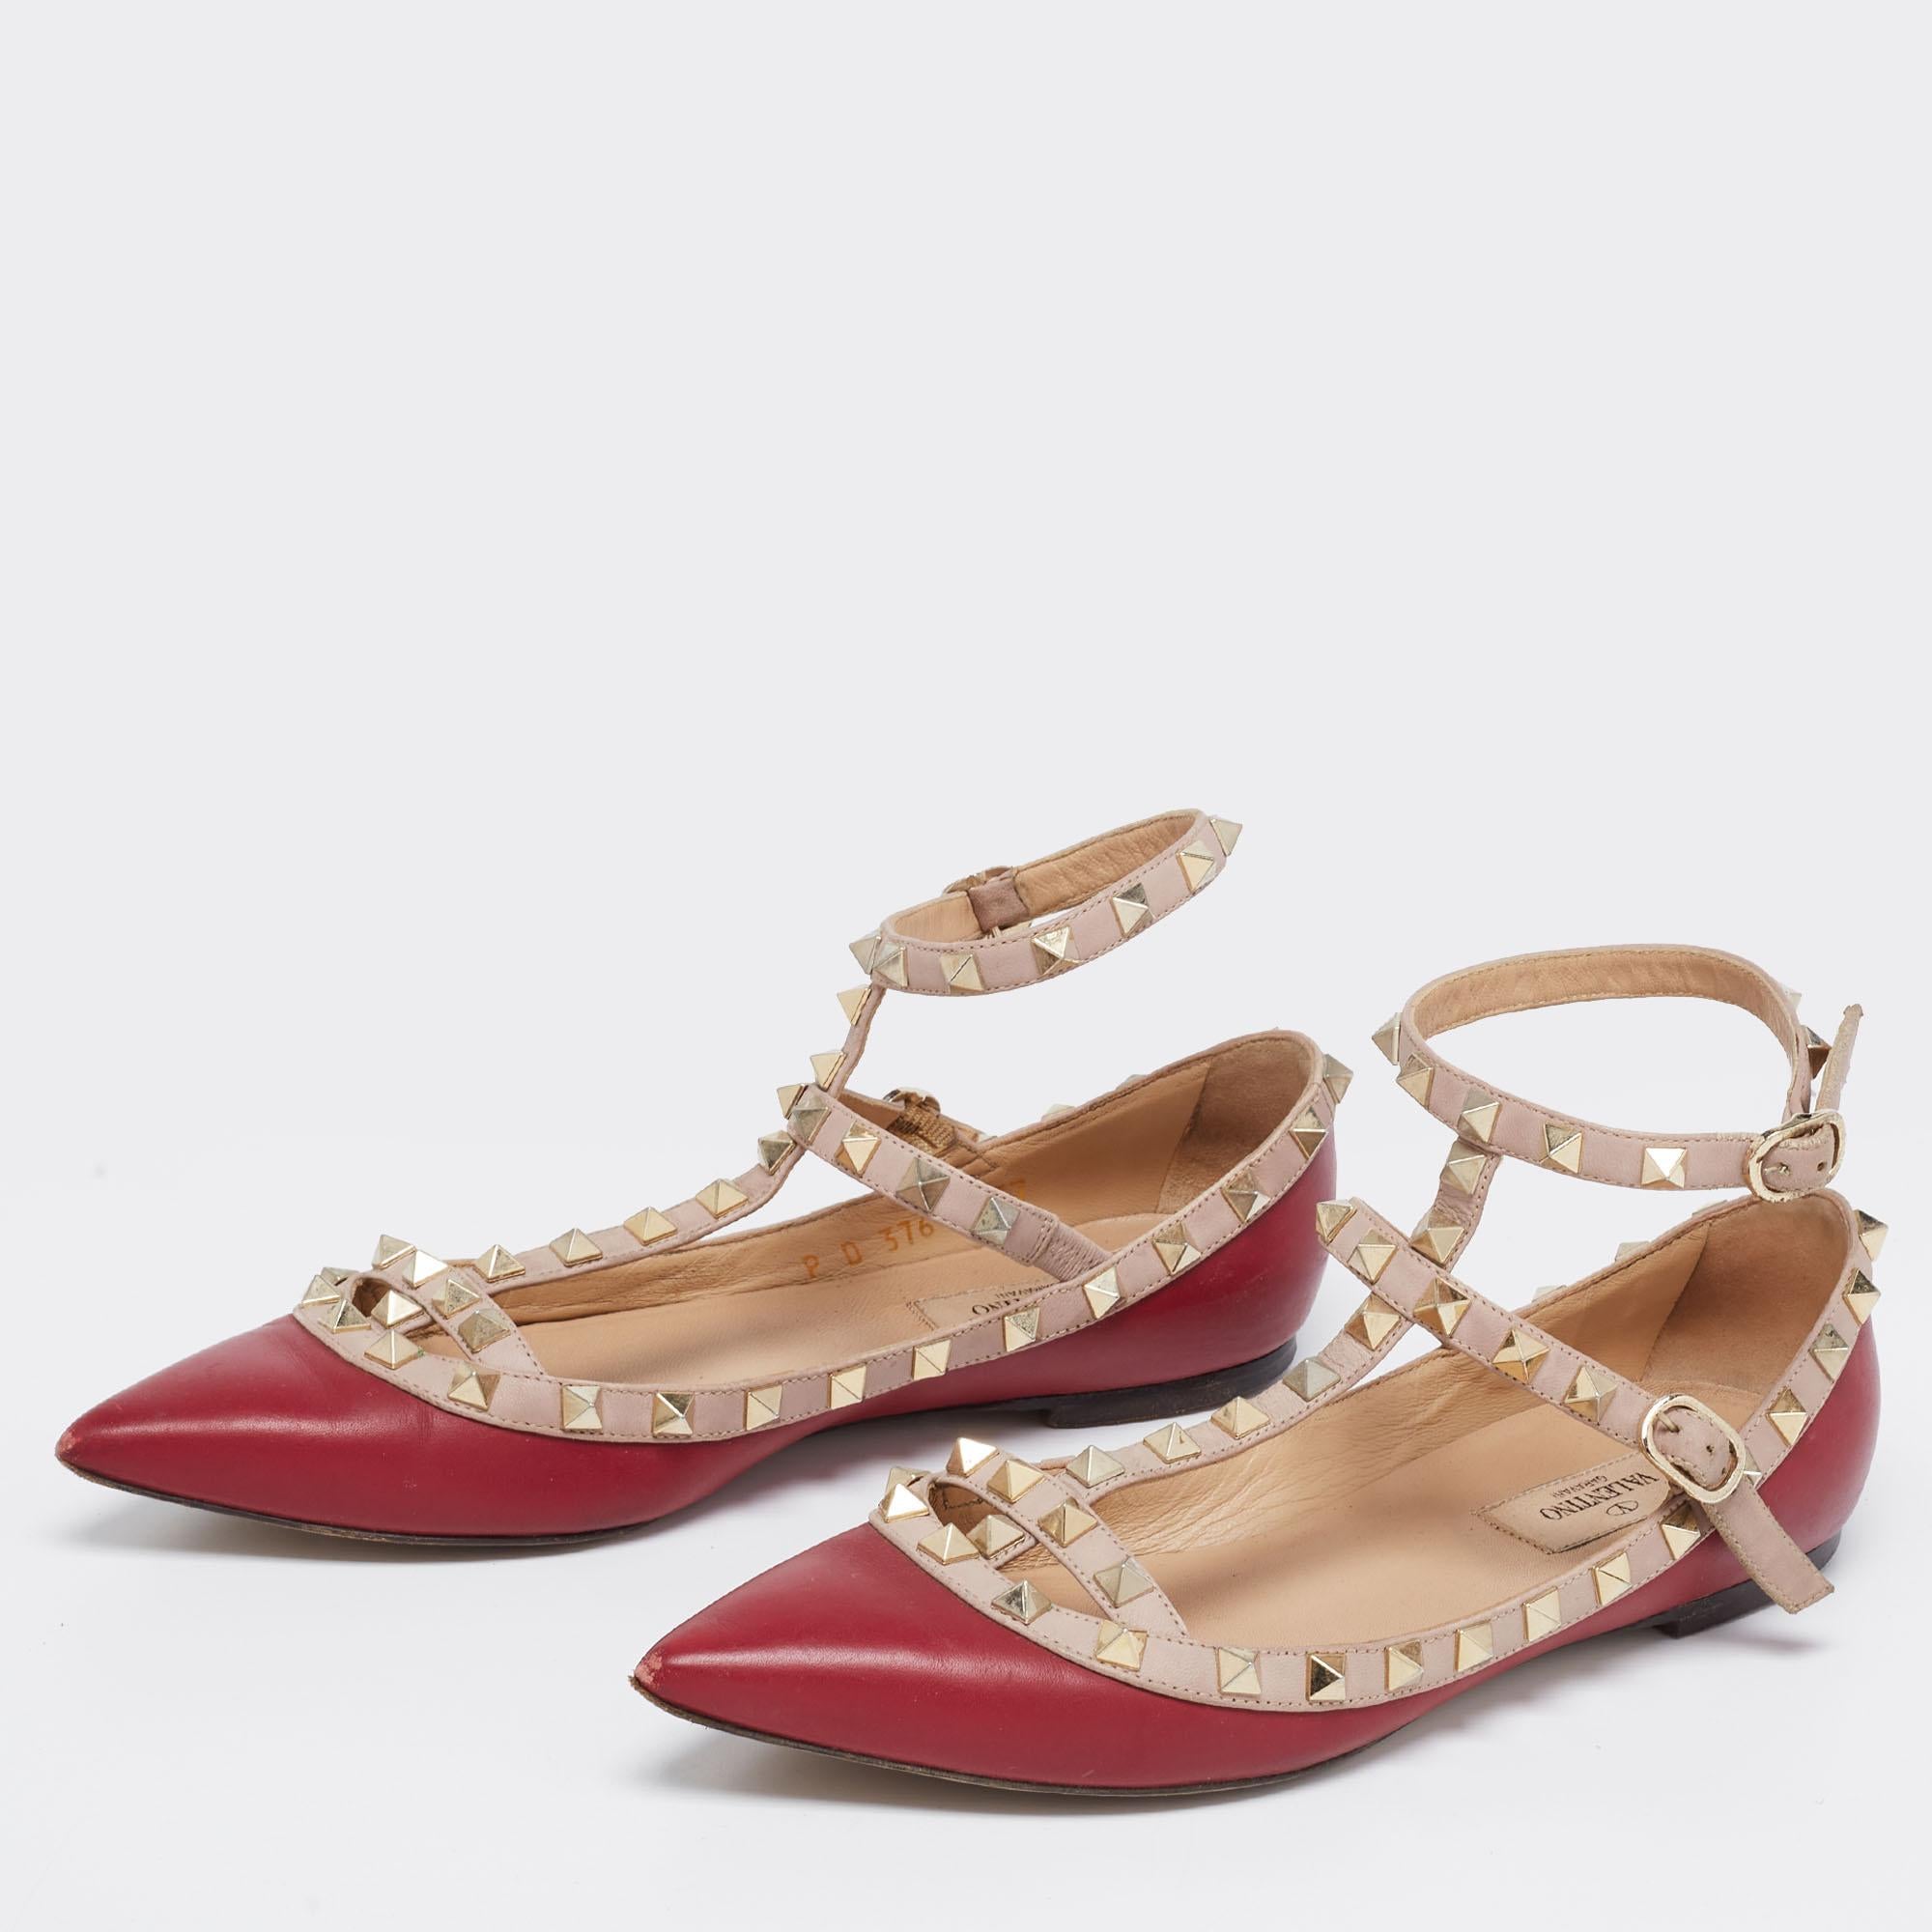 These ballet flats from the House of Valentino are all your feet need to be comfy and stylish! They are crafted using burgundy-pink leather on the exterior. They display pointed toes, Rockstud accents, and an ankle strap. These cute CL flats will